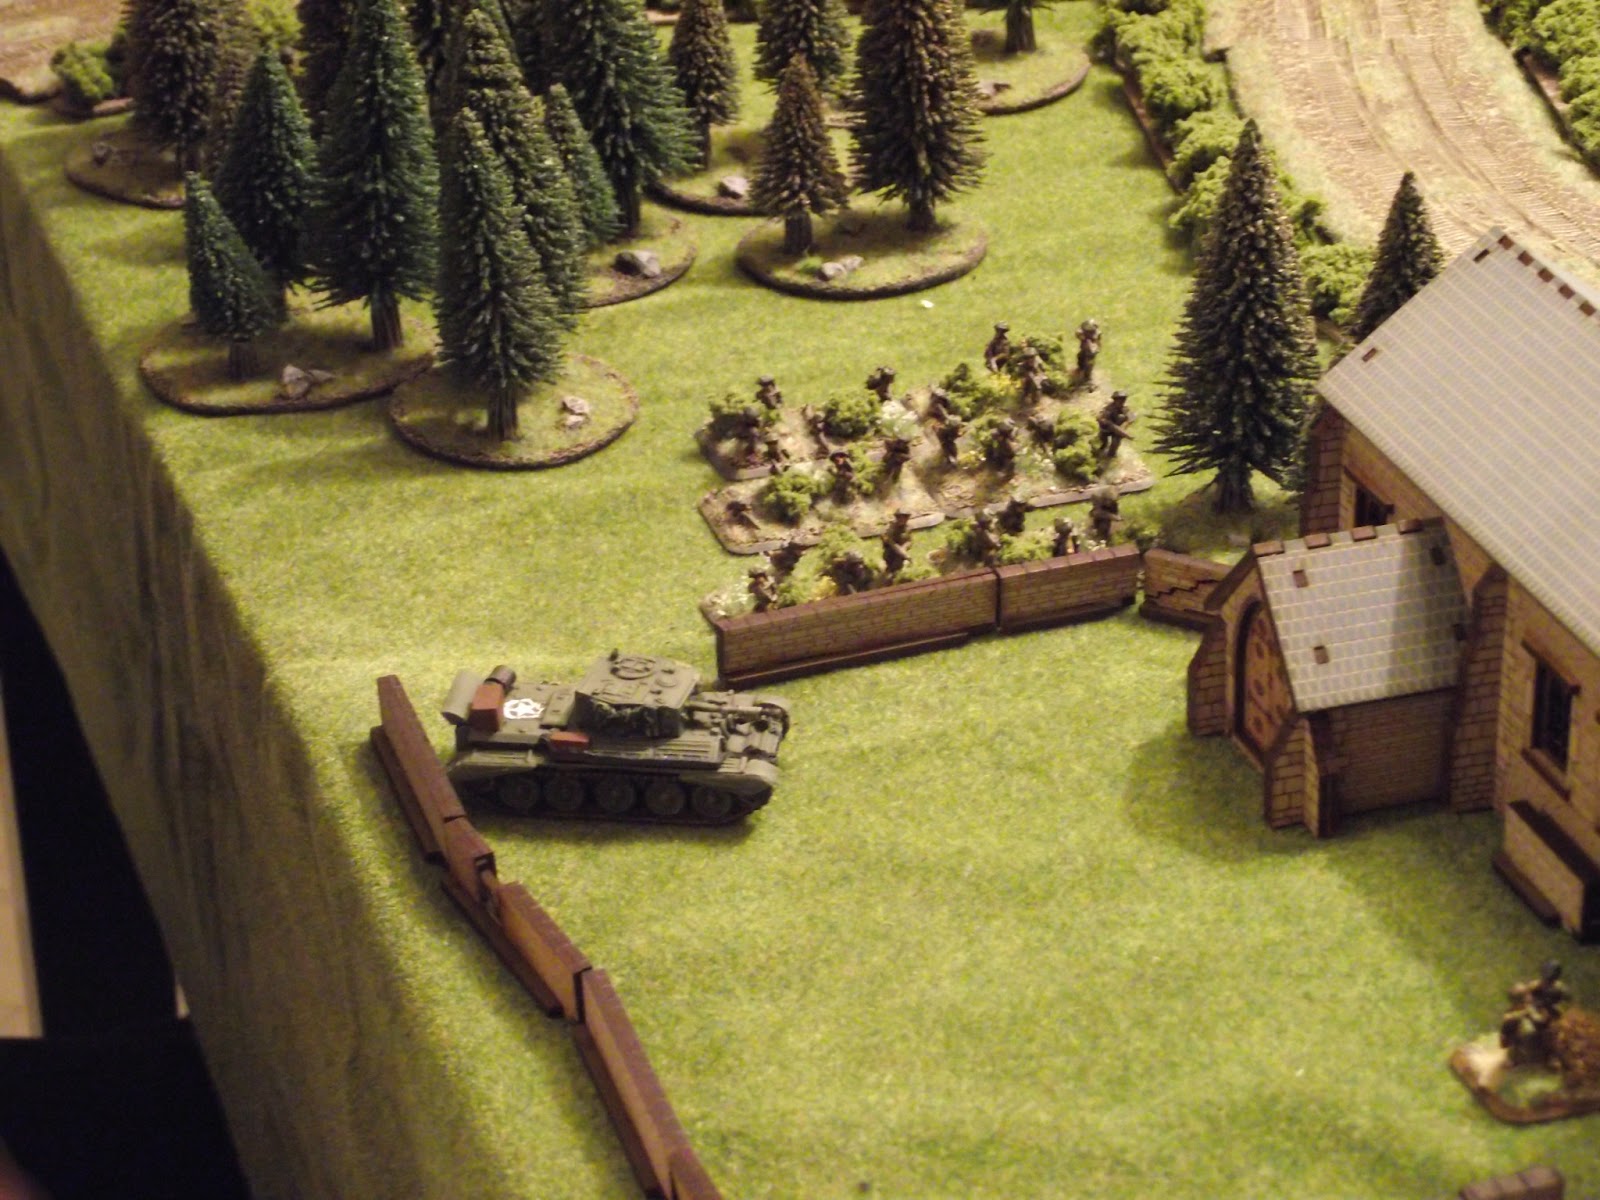  David starts to gather his platoon for an all out assault. 